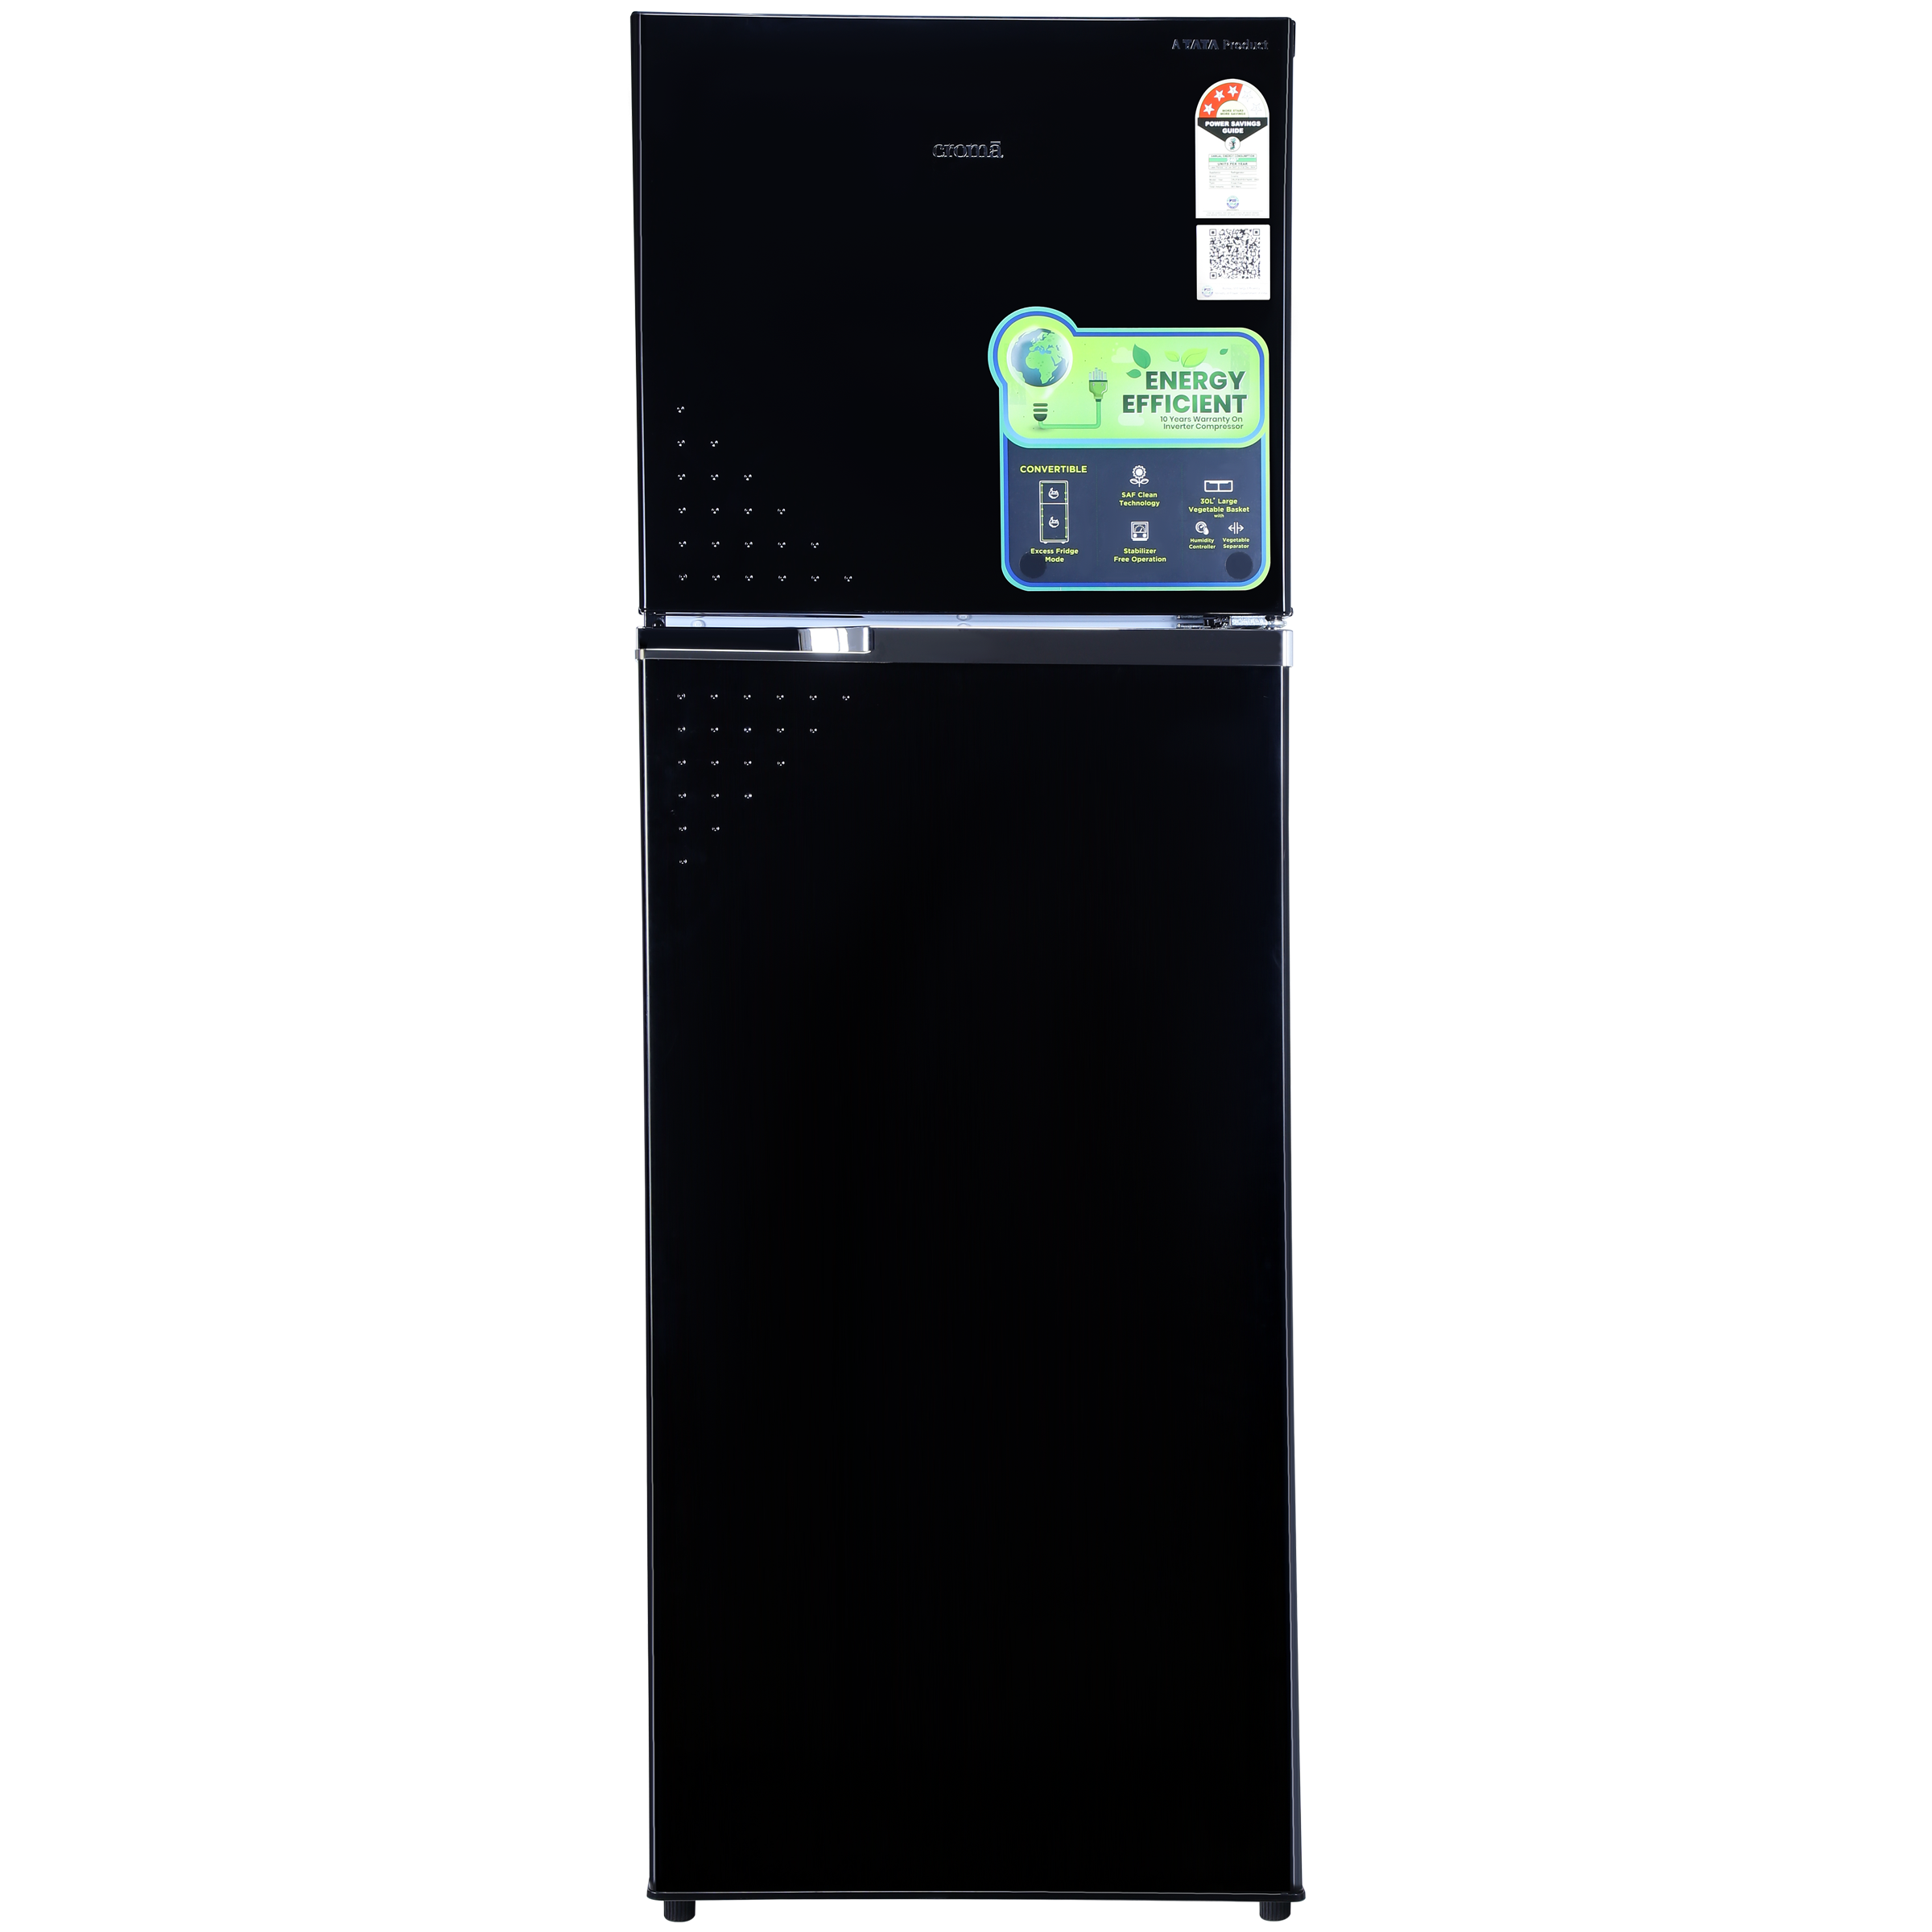 Croma 303 Litres 3 Star Frost Free Double Door Convertible Refrigerator